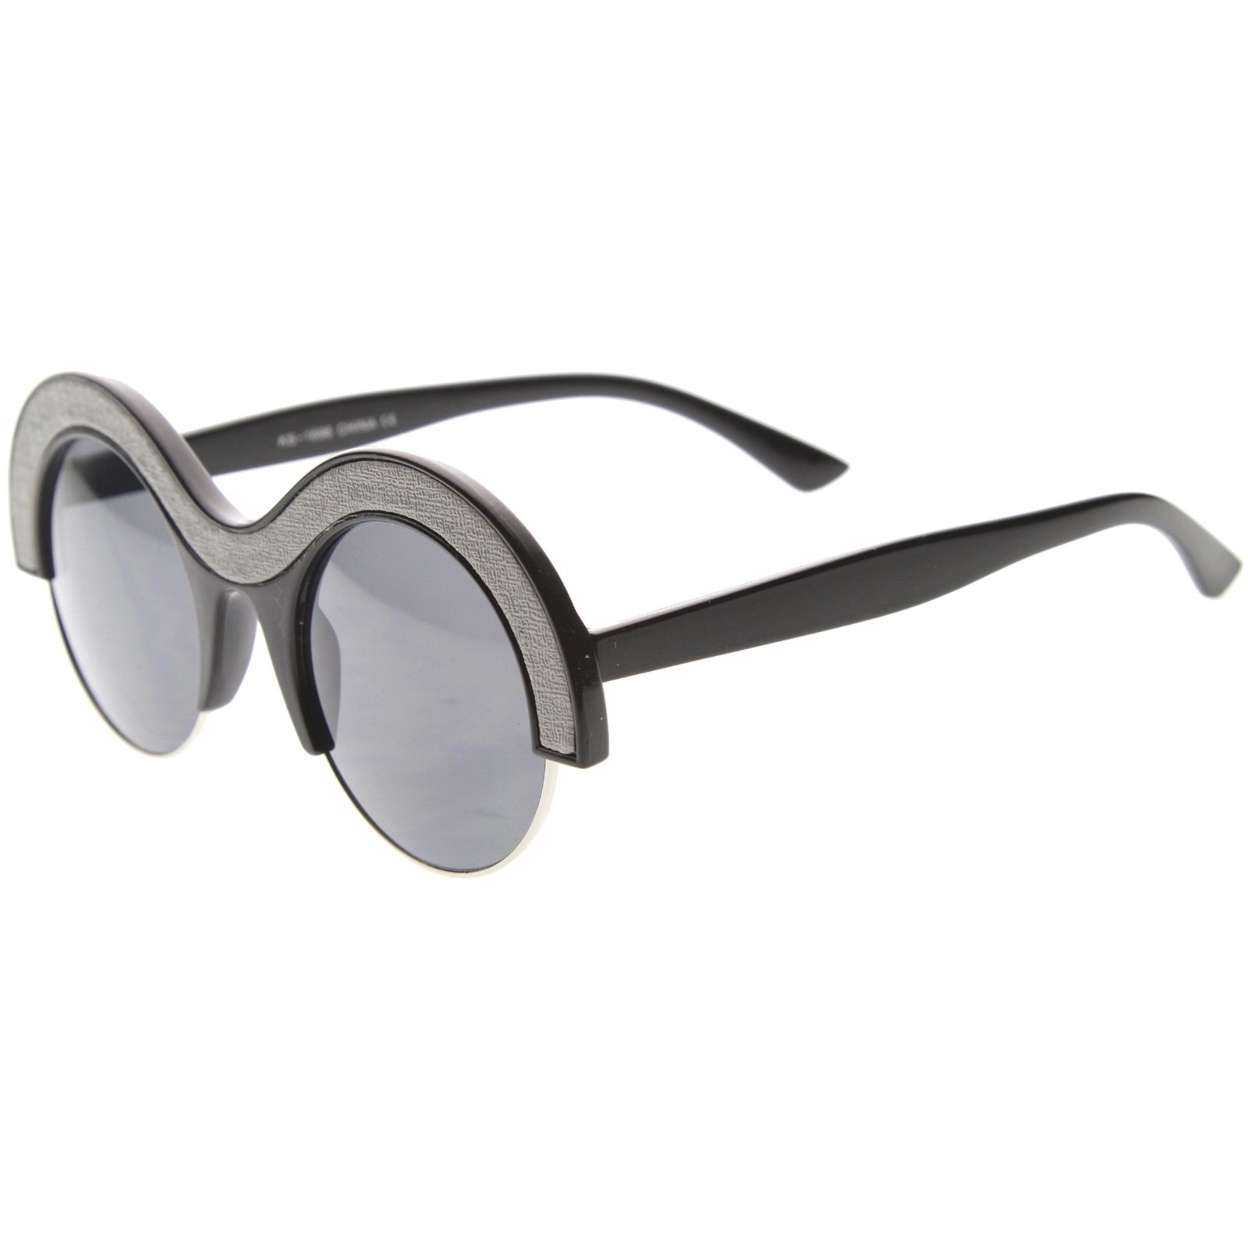 Womens Round Sunglasses With UV400 Protected Mirrored Lens - Black-Grey / Ice